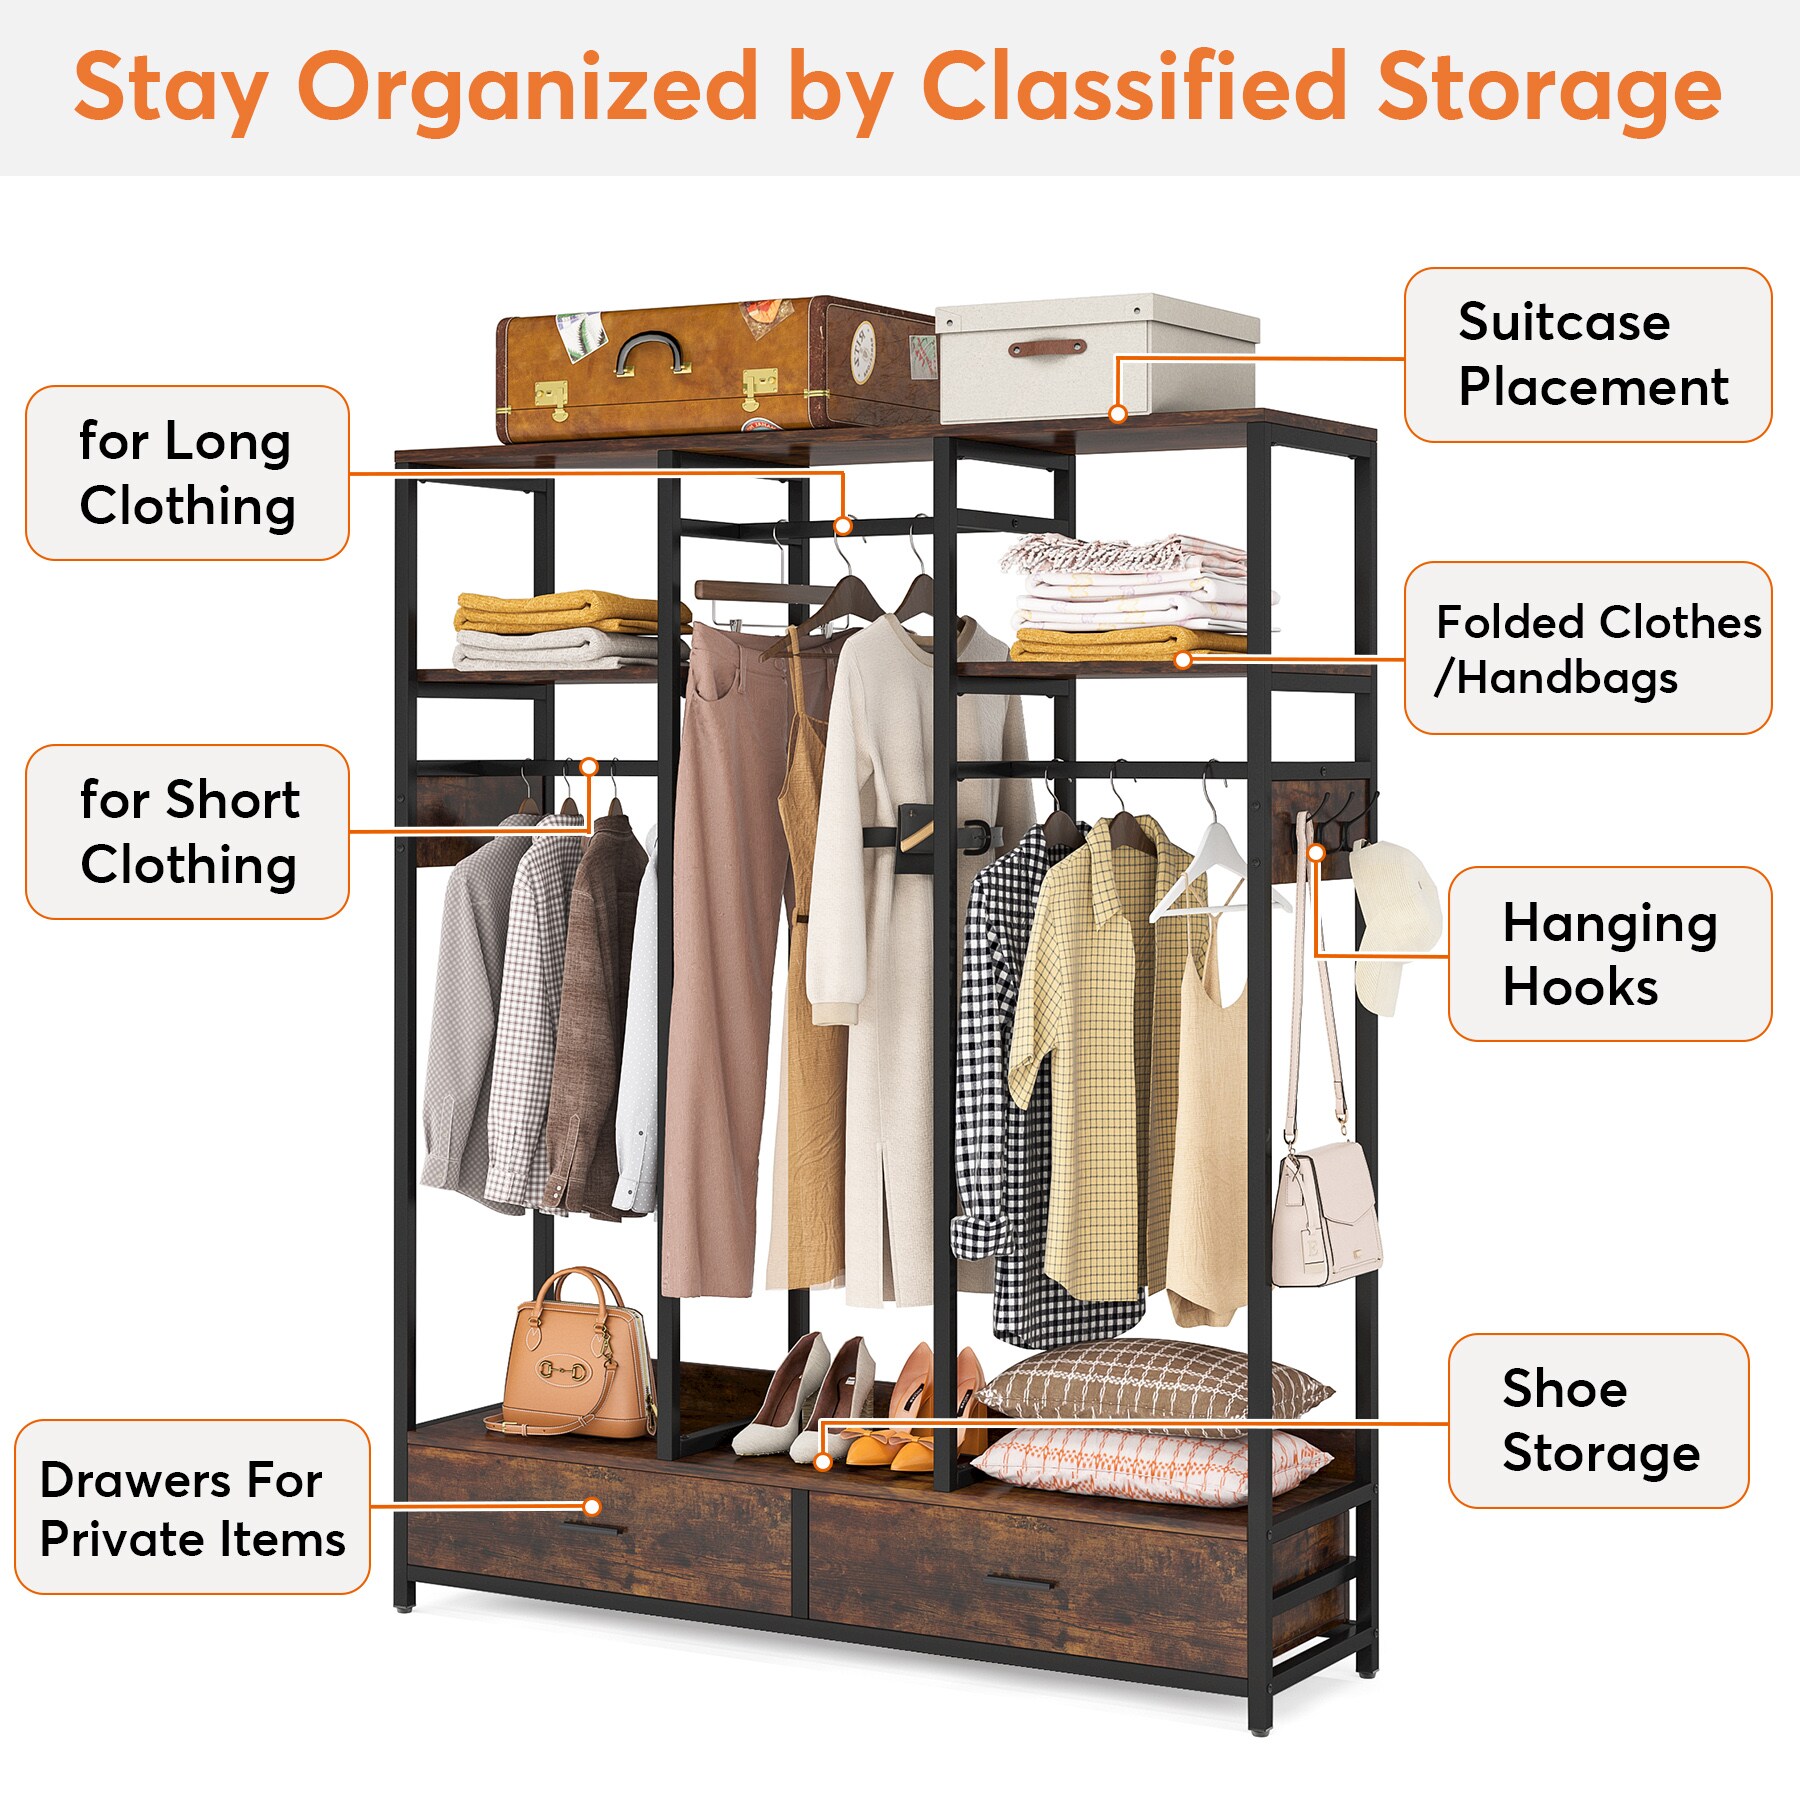 Tribesigns 4.59-ft to 4.59-ft W x 5.93-ft H Rustic Brown Solid Shelving Wood Closet System | HOGA-F1630